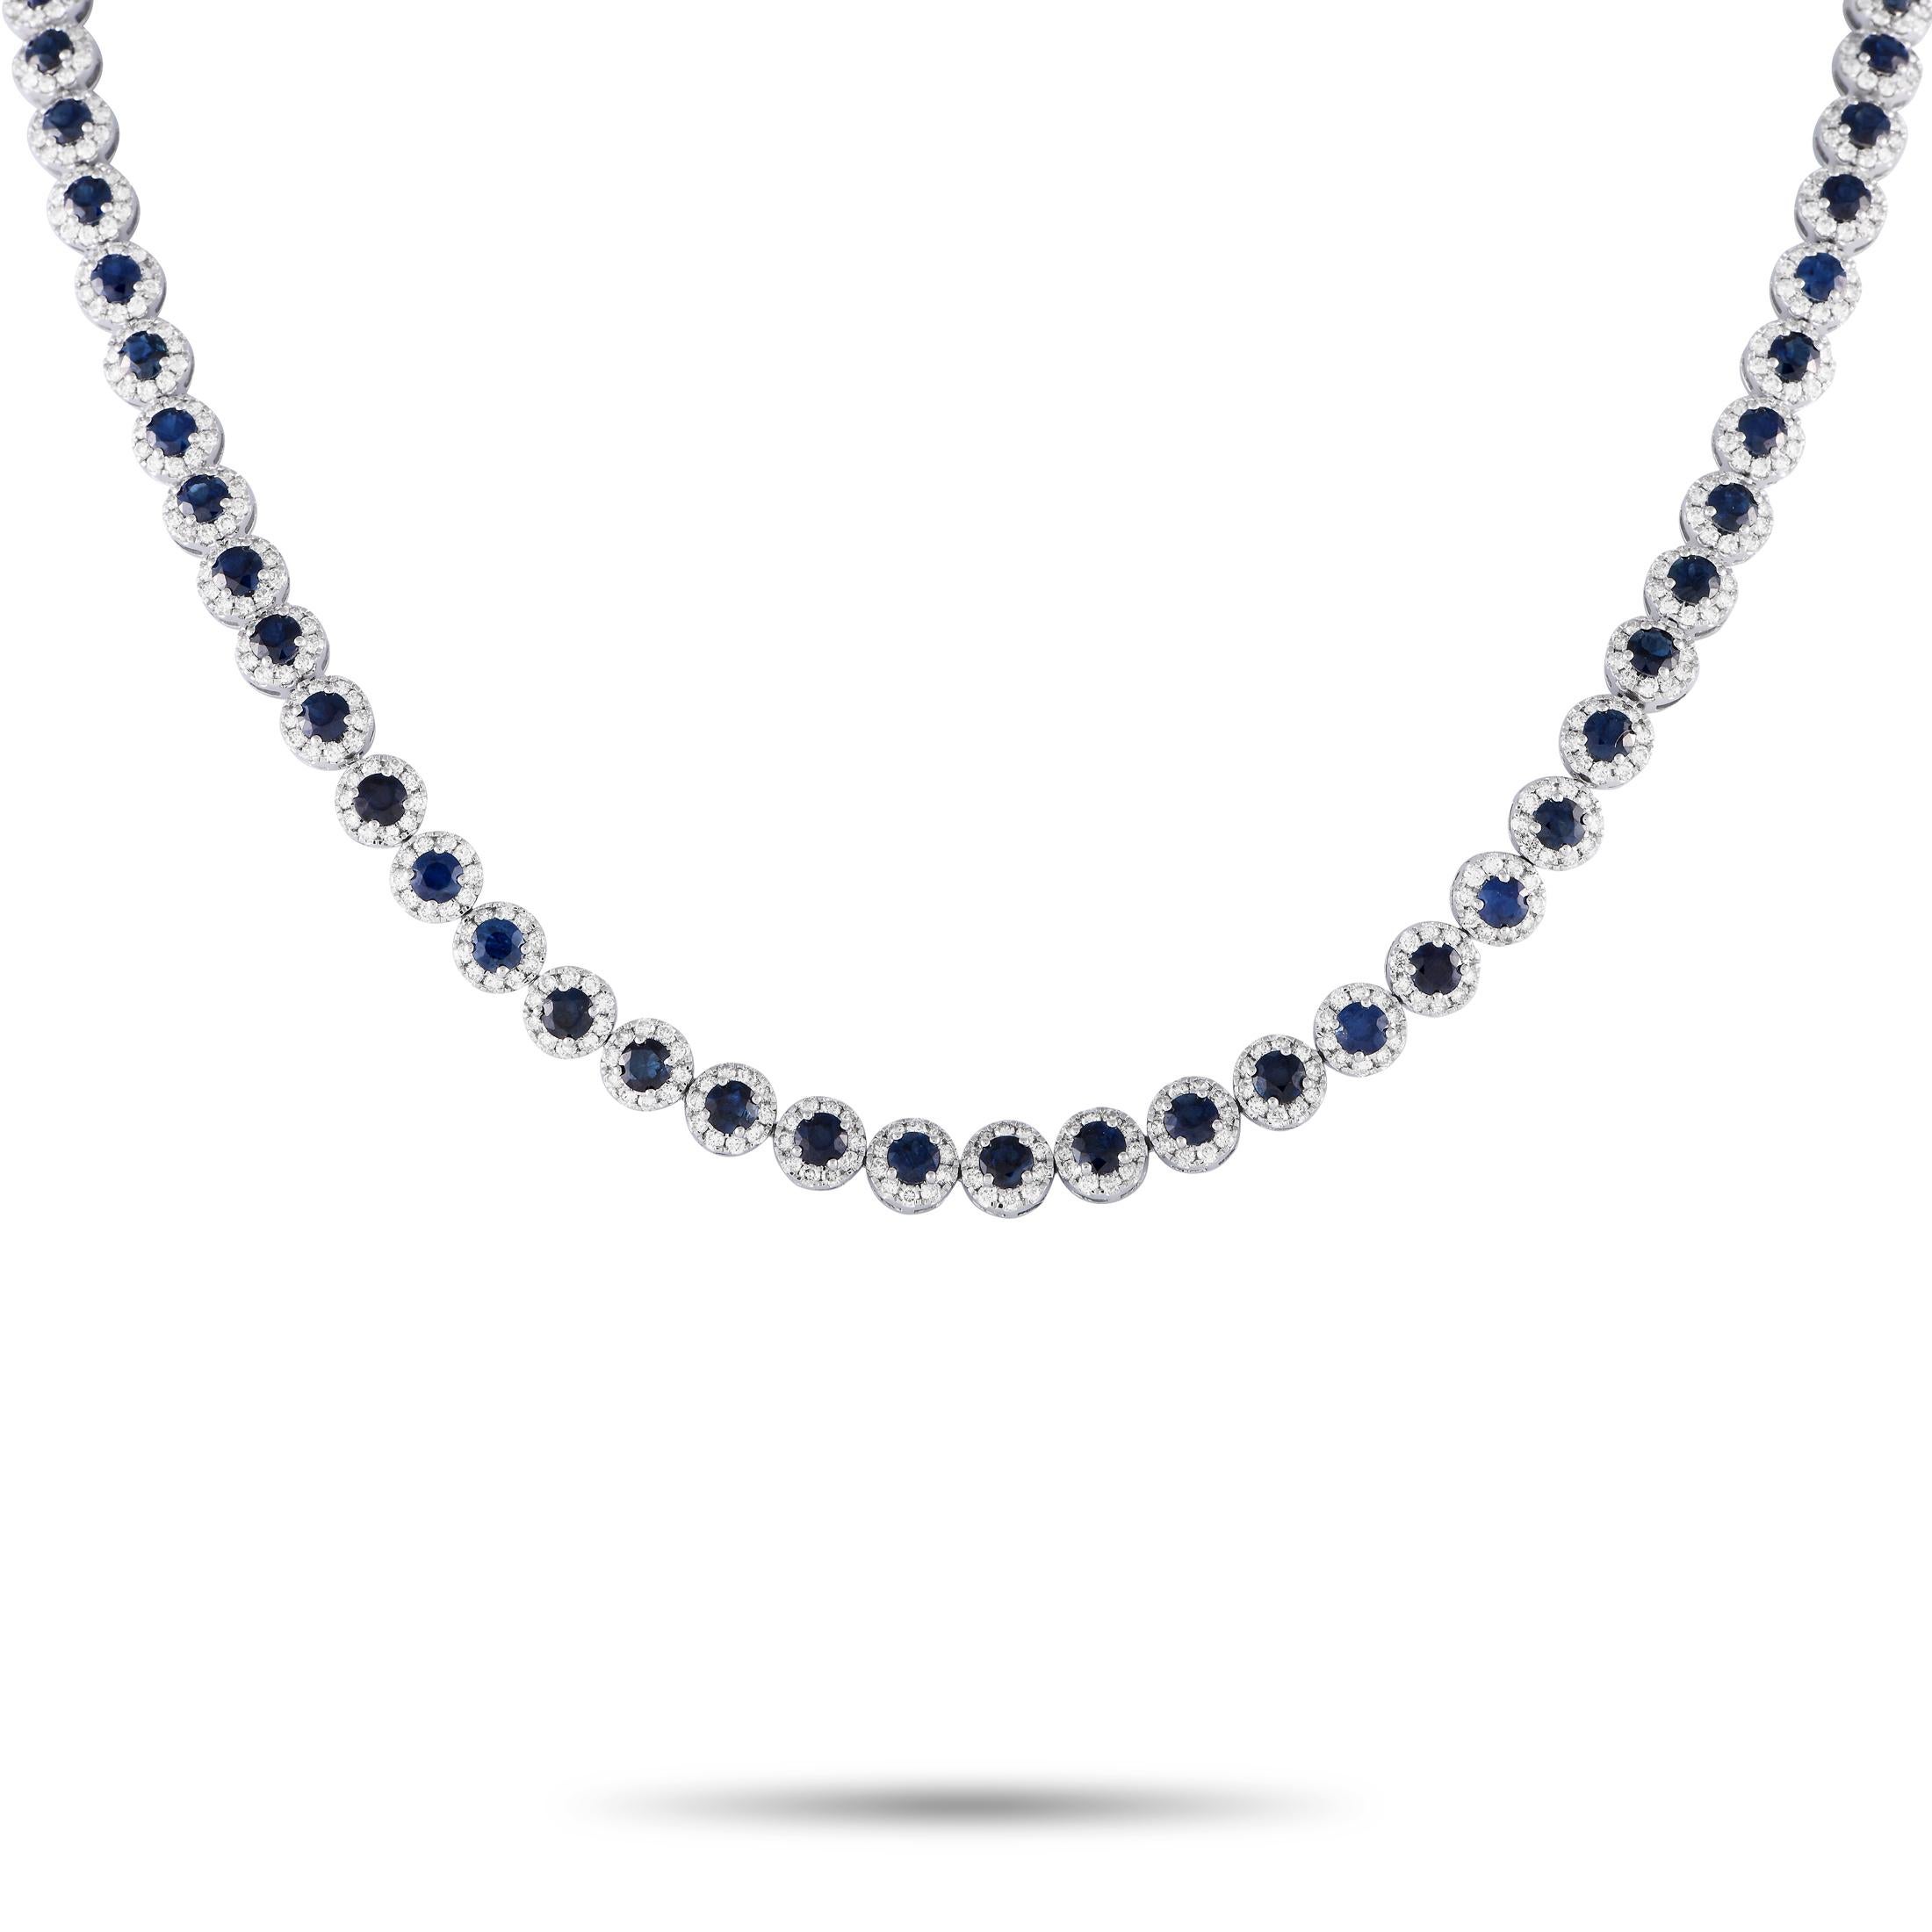 LB Exclusive 14k White Gold 8.15 Carat Diamond and Sapphire Necklace In Excellent Condition For Sale In Southampton, PA